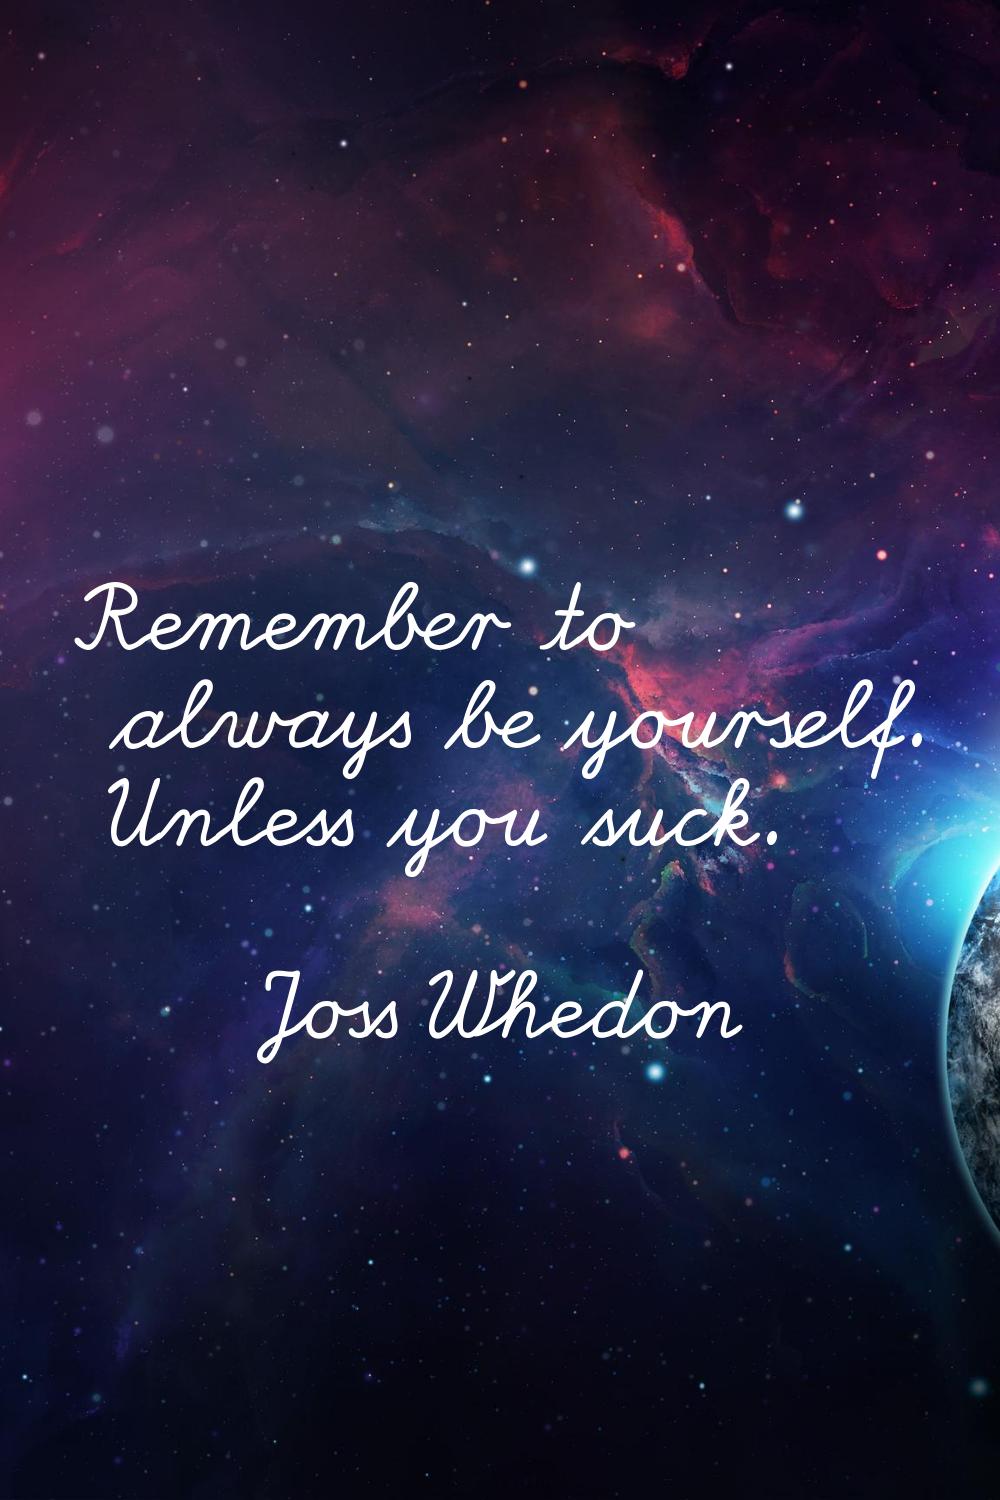 Remember to always be yourself. Unless you suck.